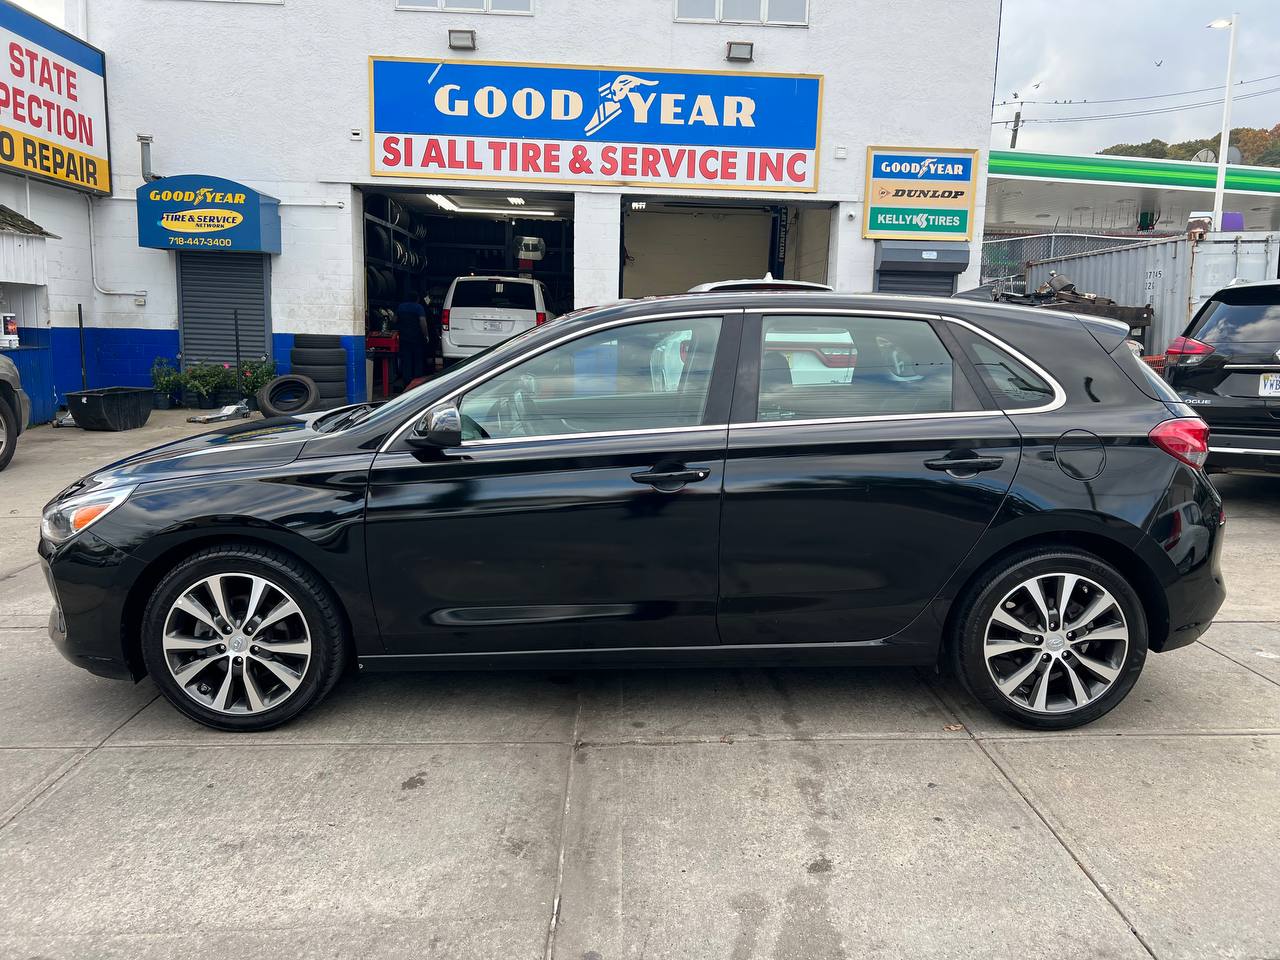 Used - Hyundai Elantra GT Hatchback for sale in Staten Island NY